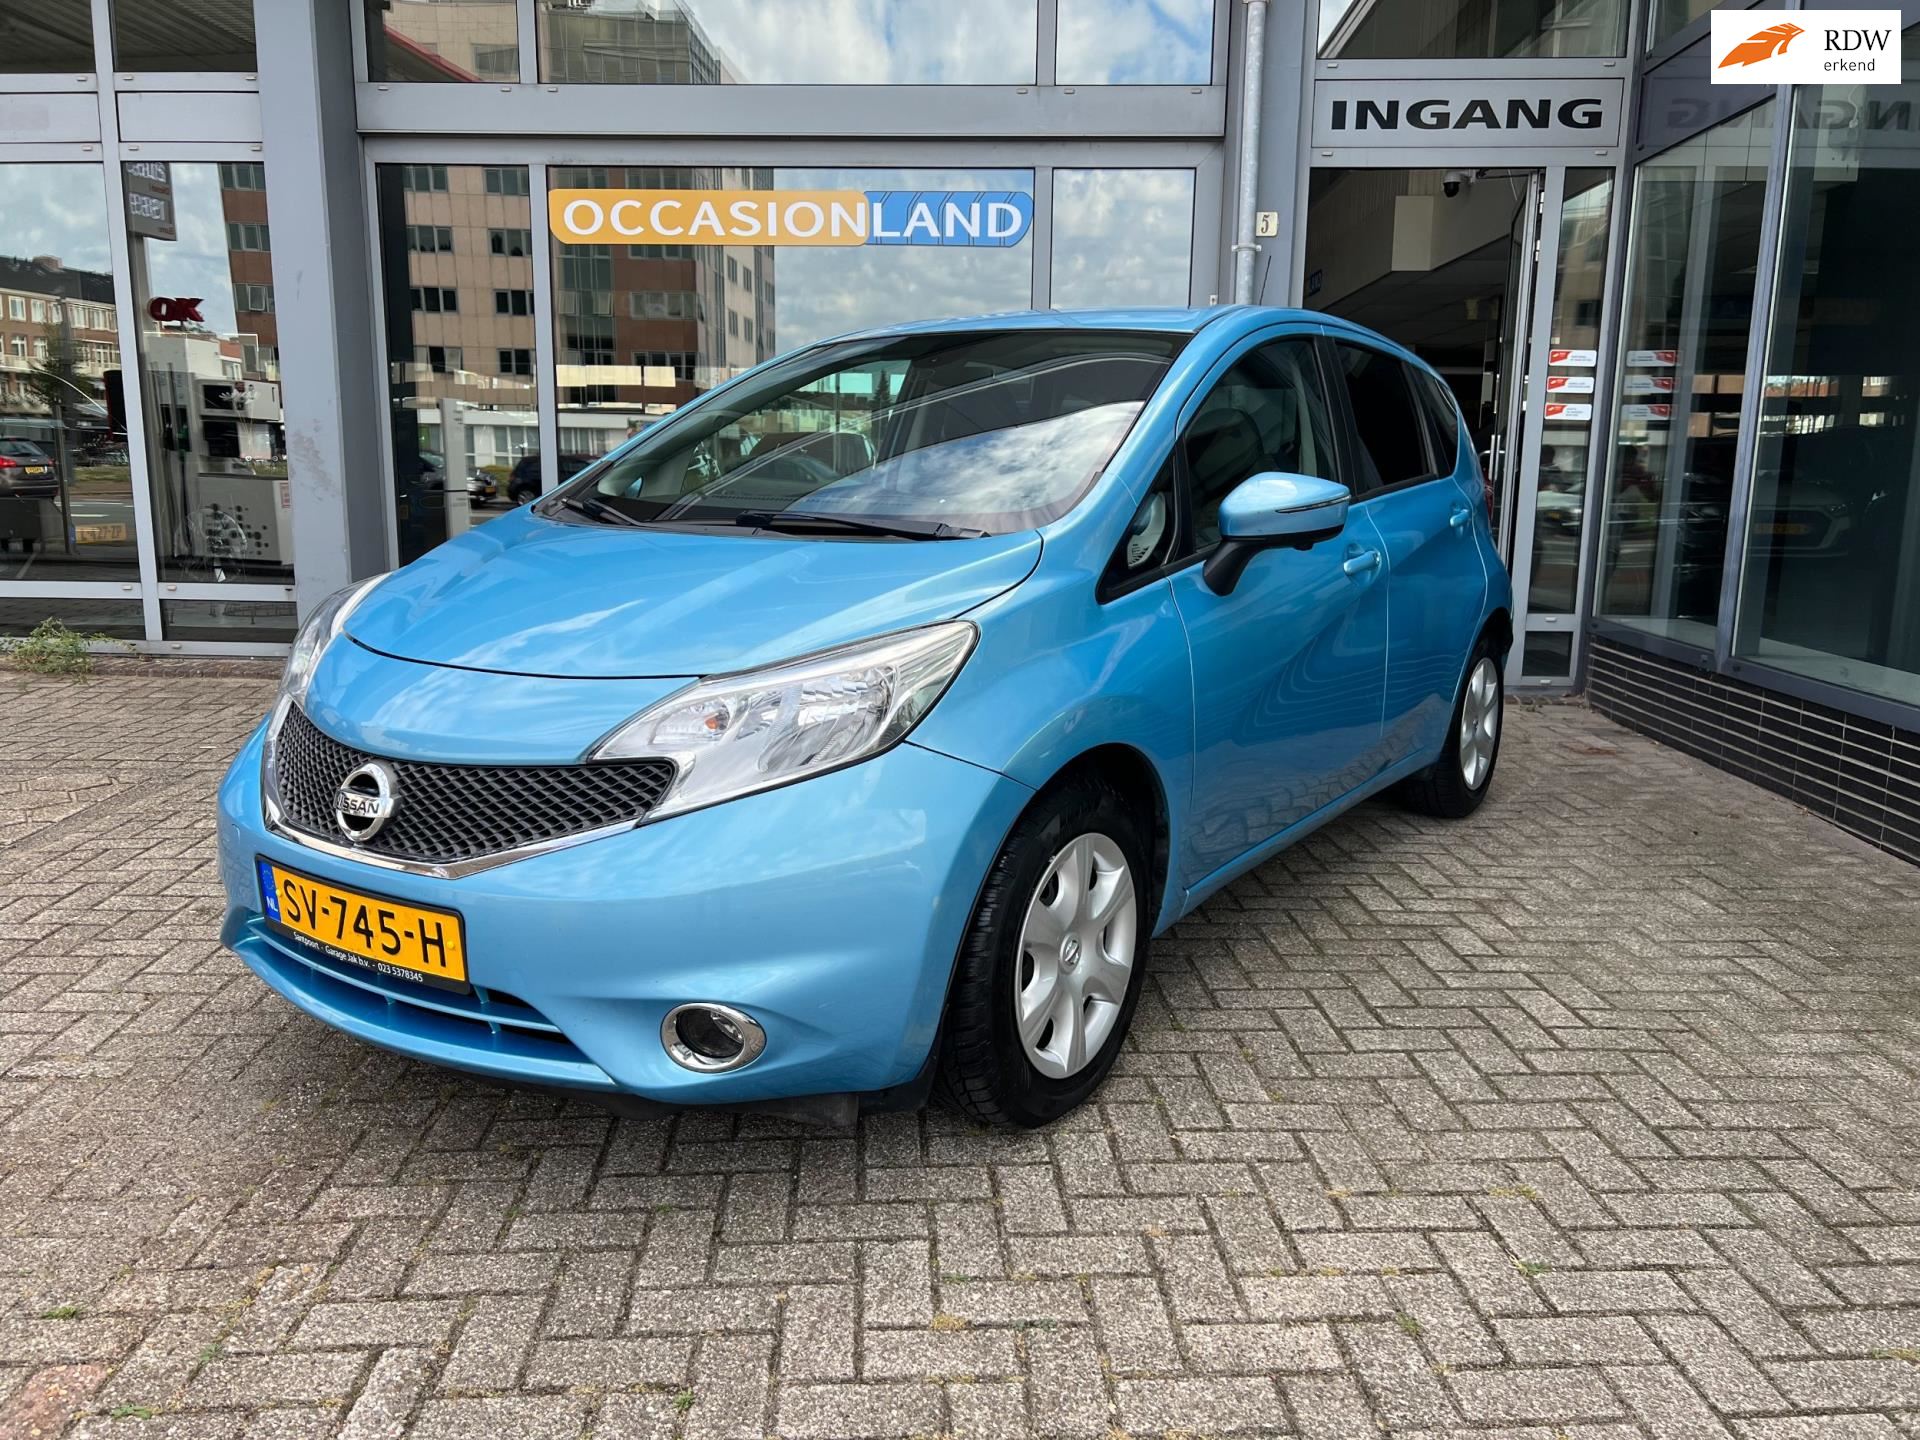 Nissan Note occasion - Occasionland